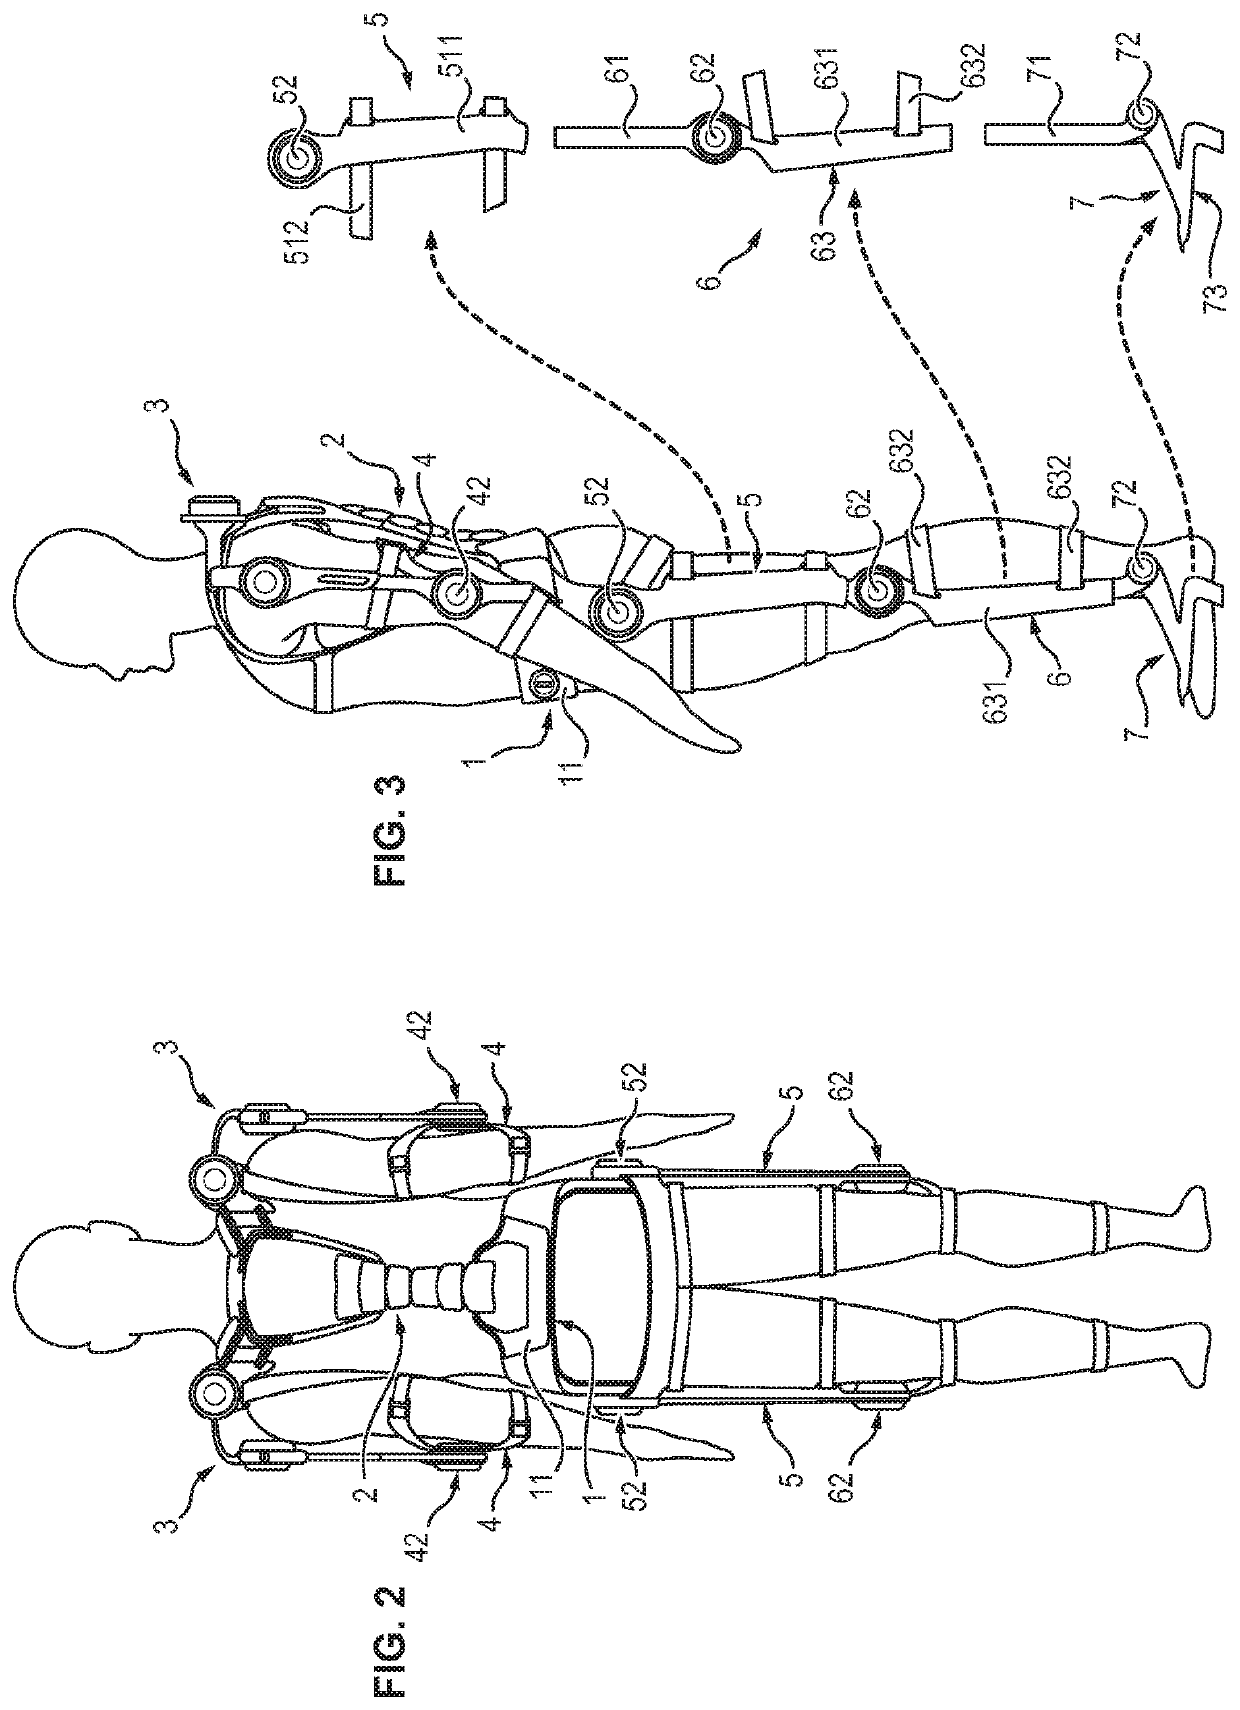 Foot portion for an exoskeleton structure